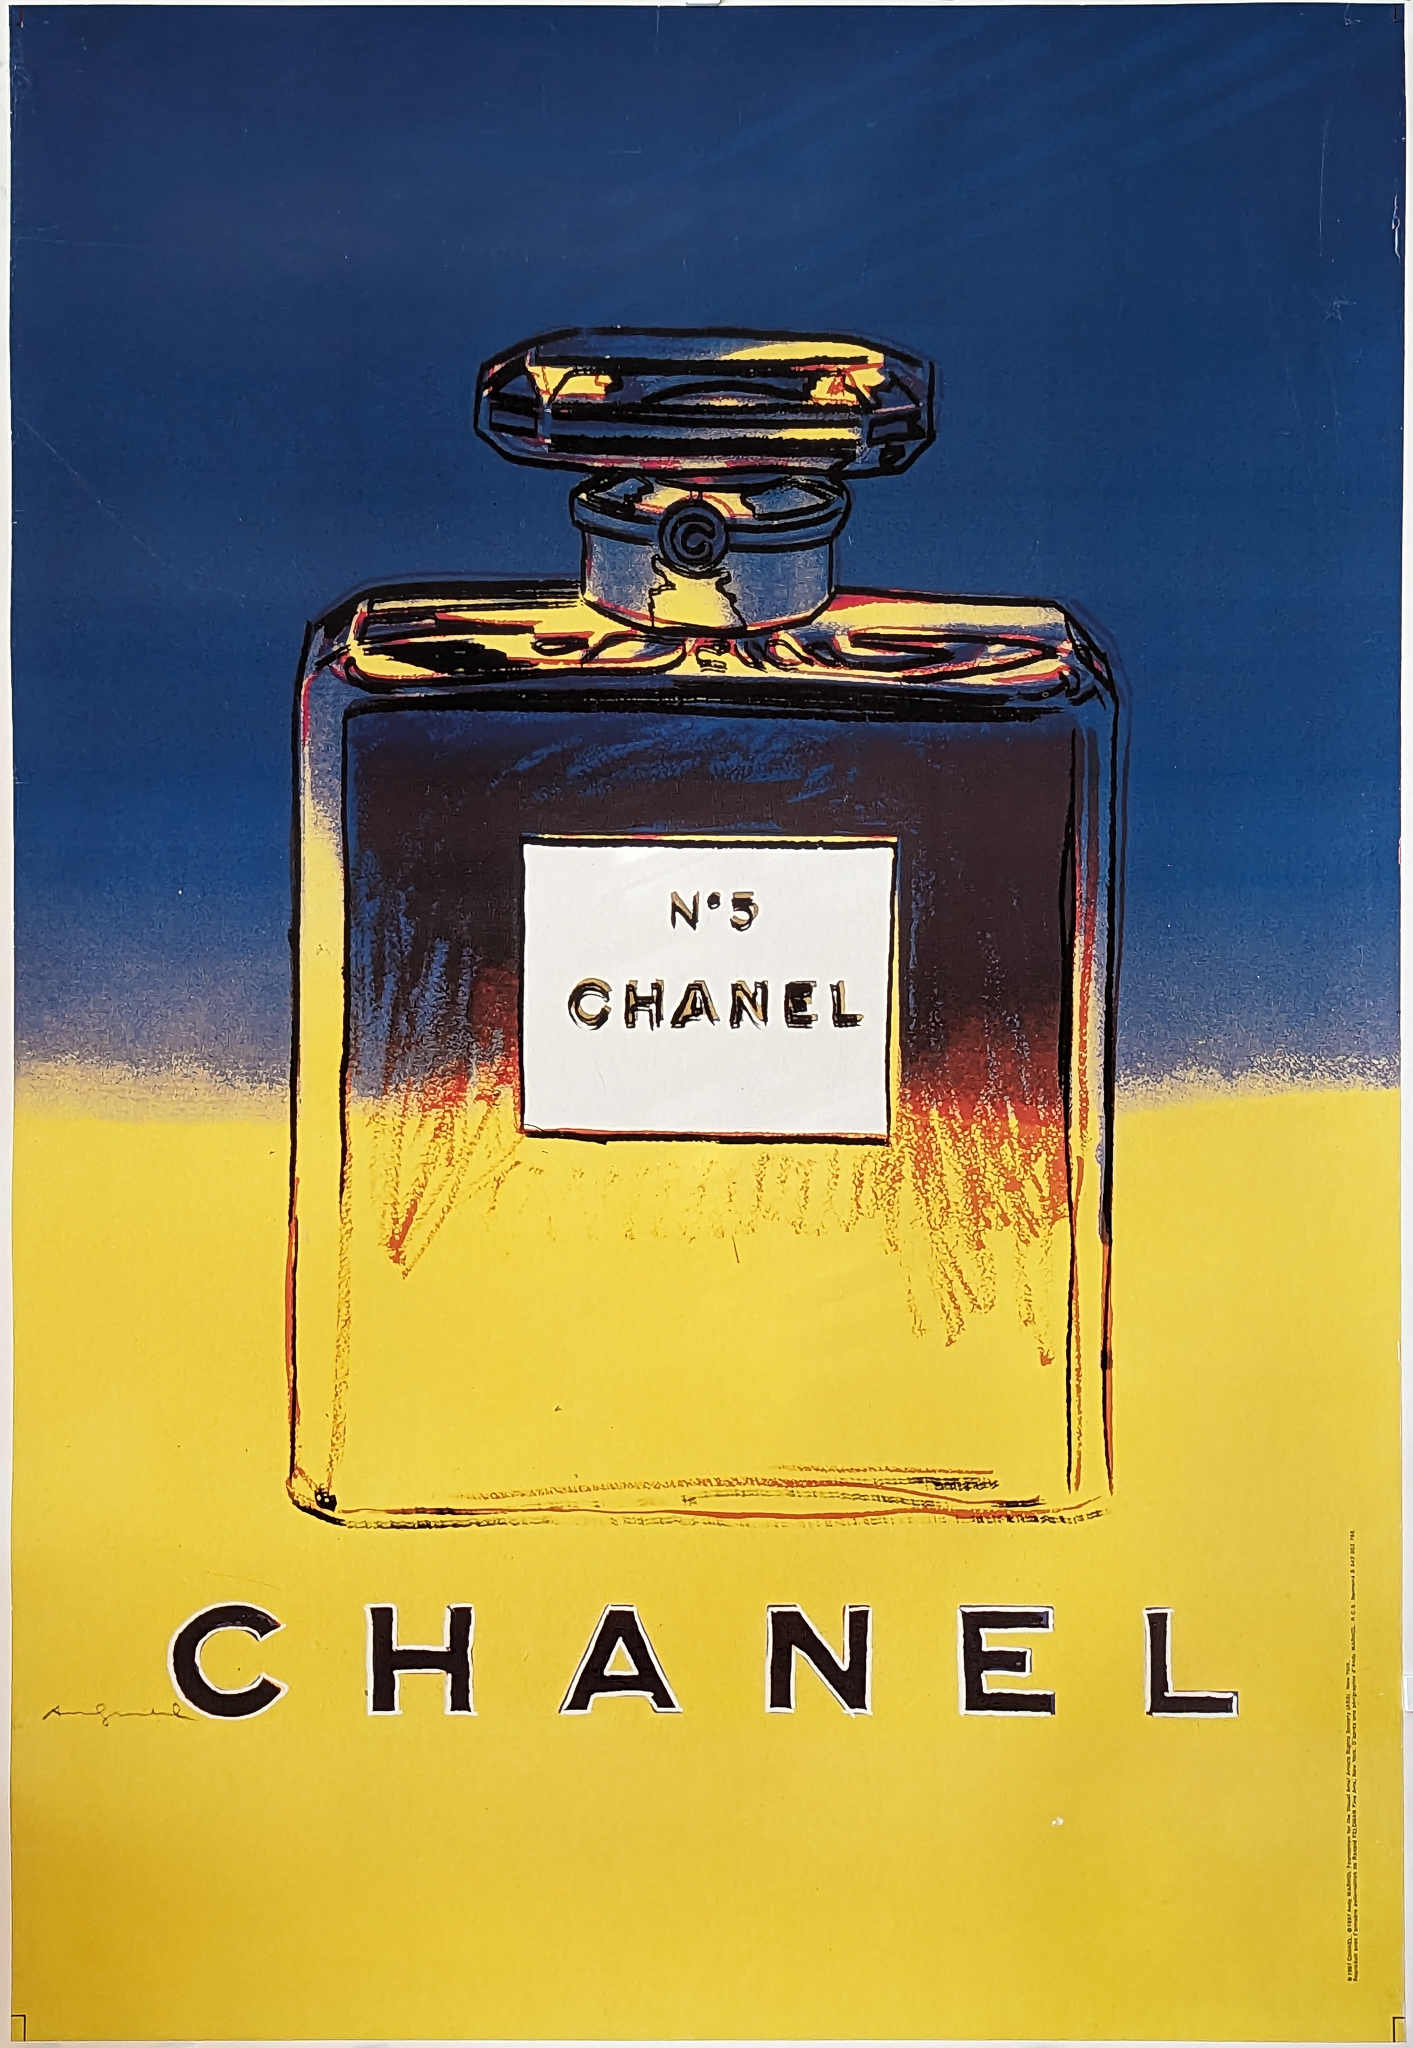 Chanel no5 | The Art Syndicate